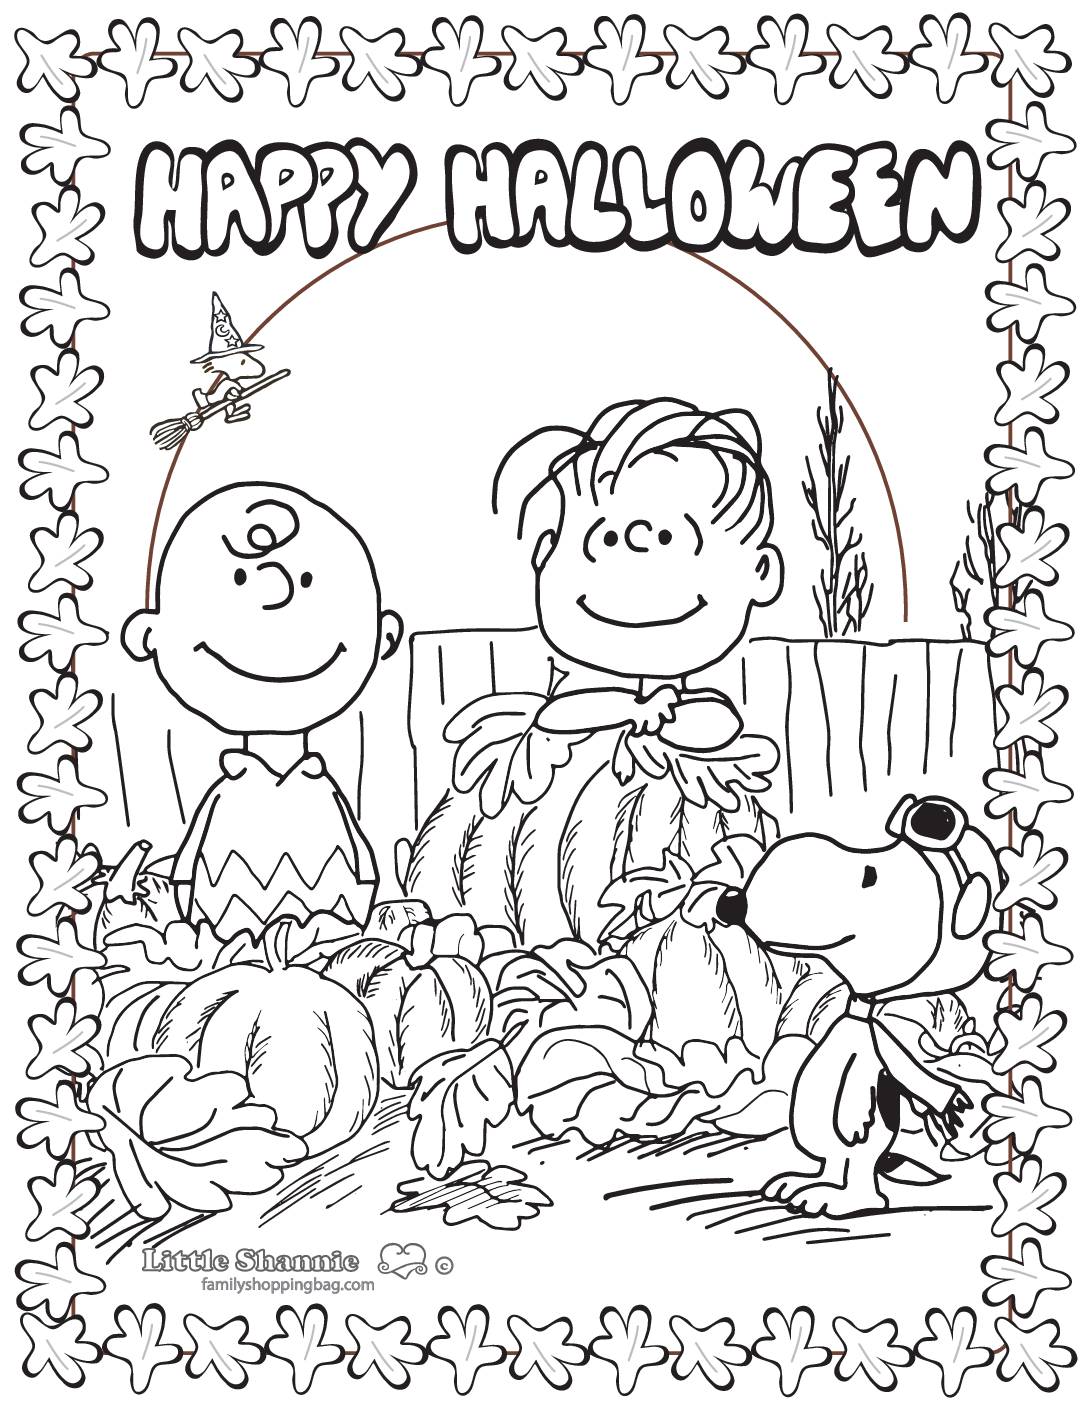 Coloring Page 6 Peanuts Halloween Coloring Pages